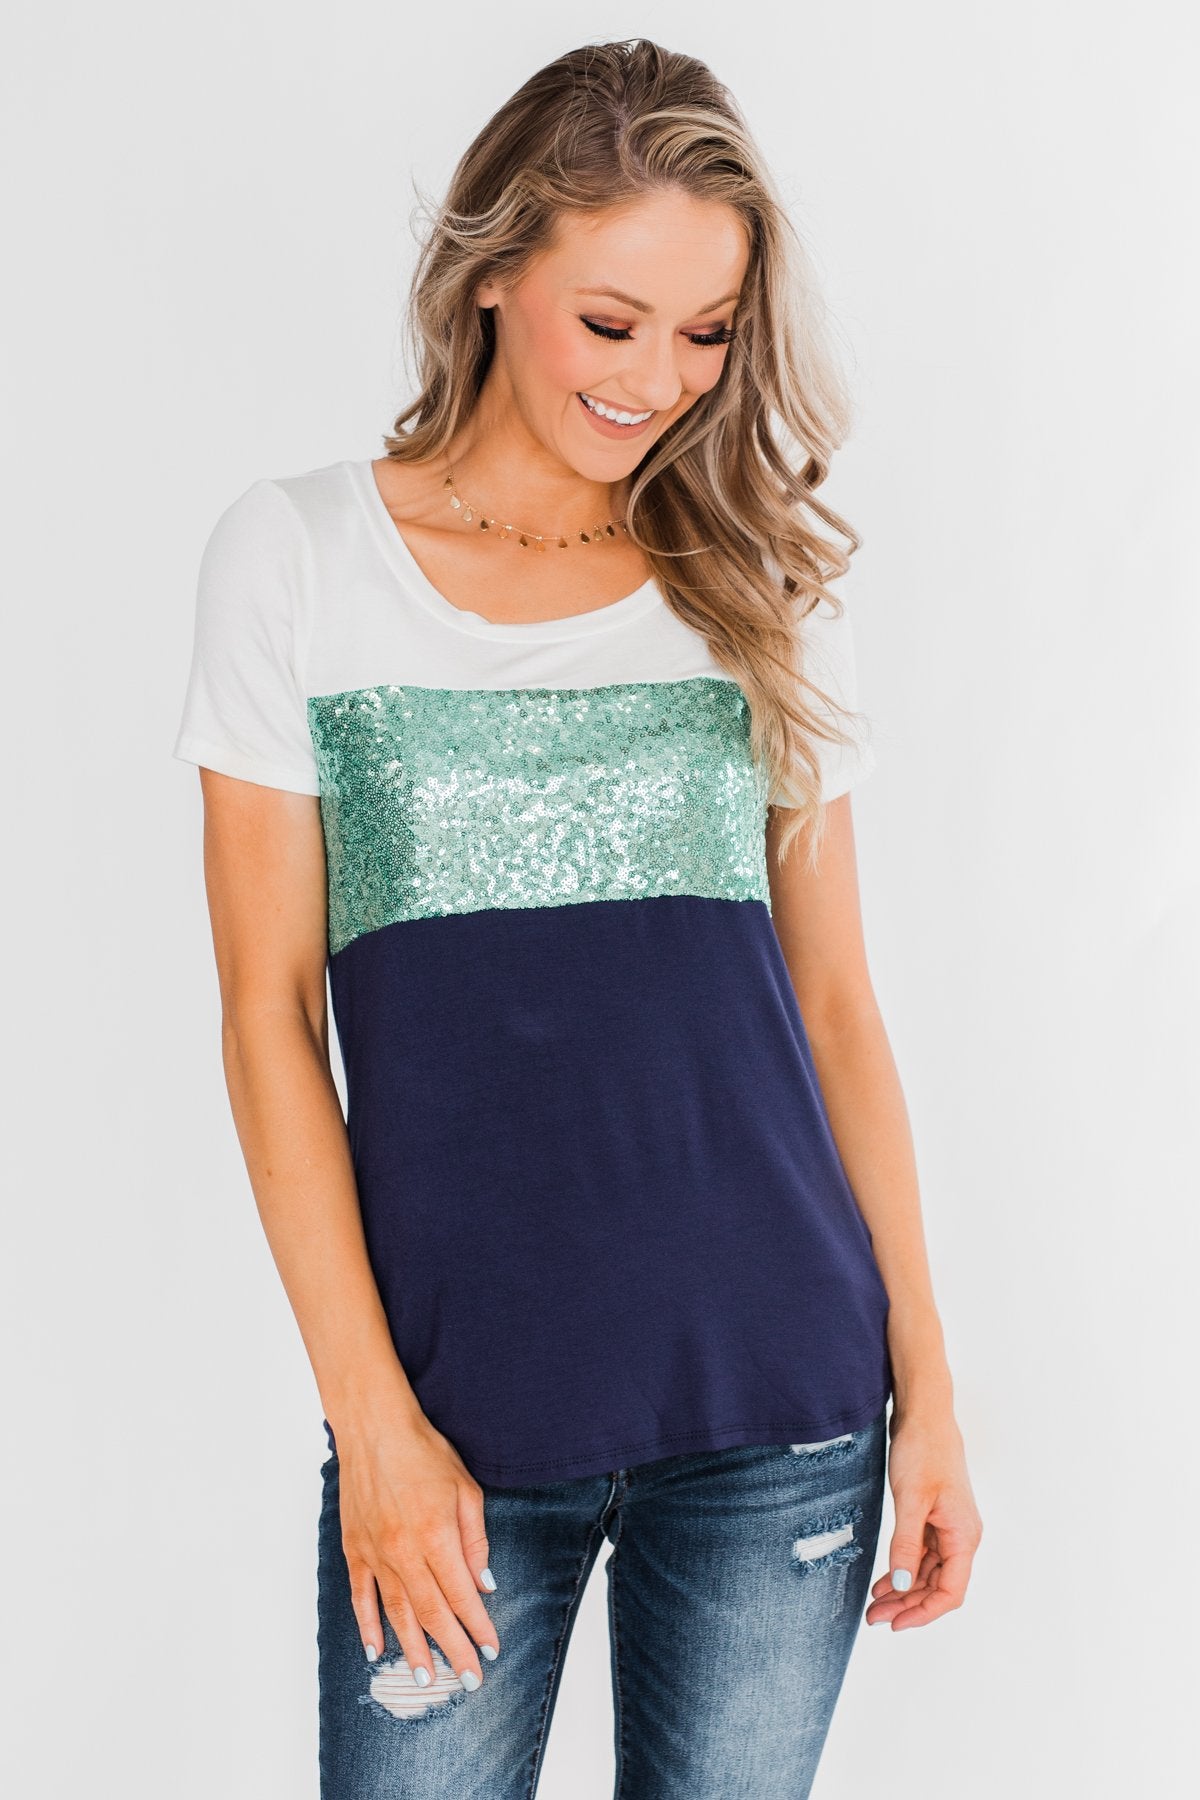 Part Of Your World Sequin Top- Teal Green & Navy